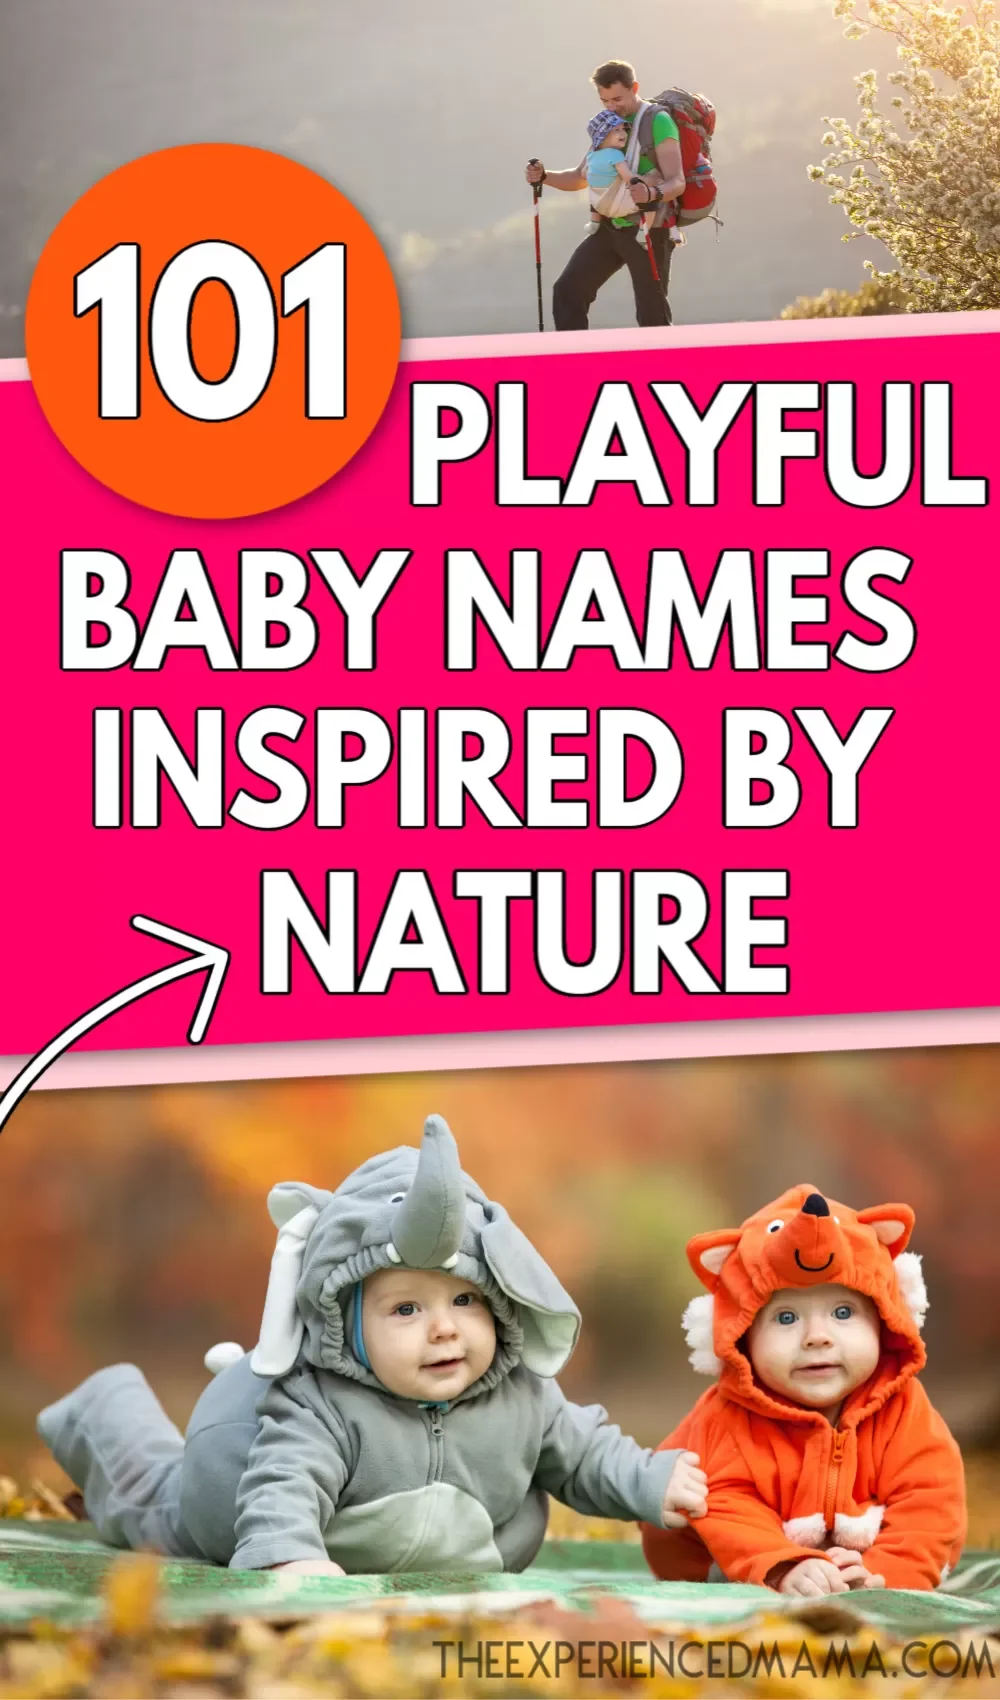 101 Whimsical Nature Baby Names with Meanings - Growing Serendipity